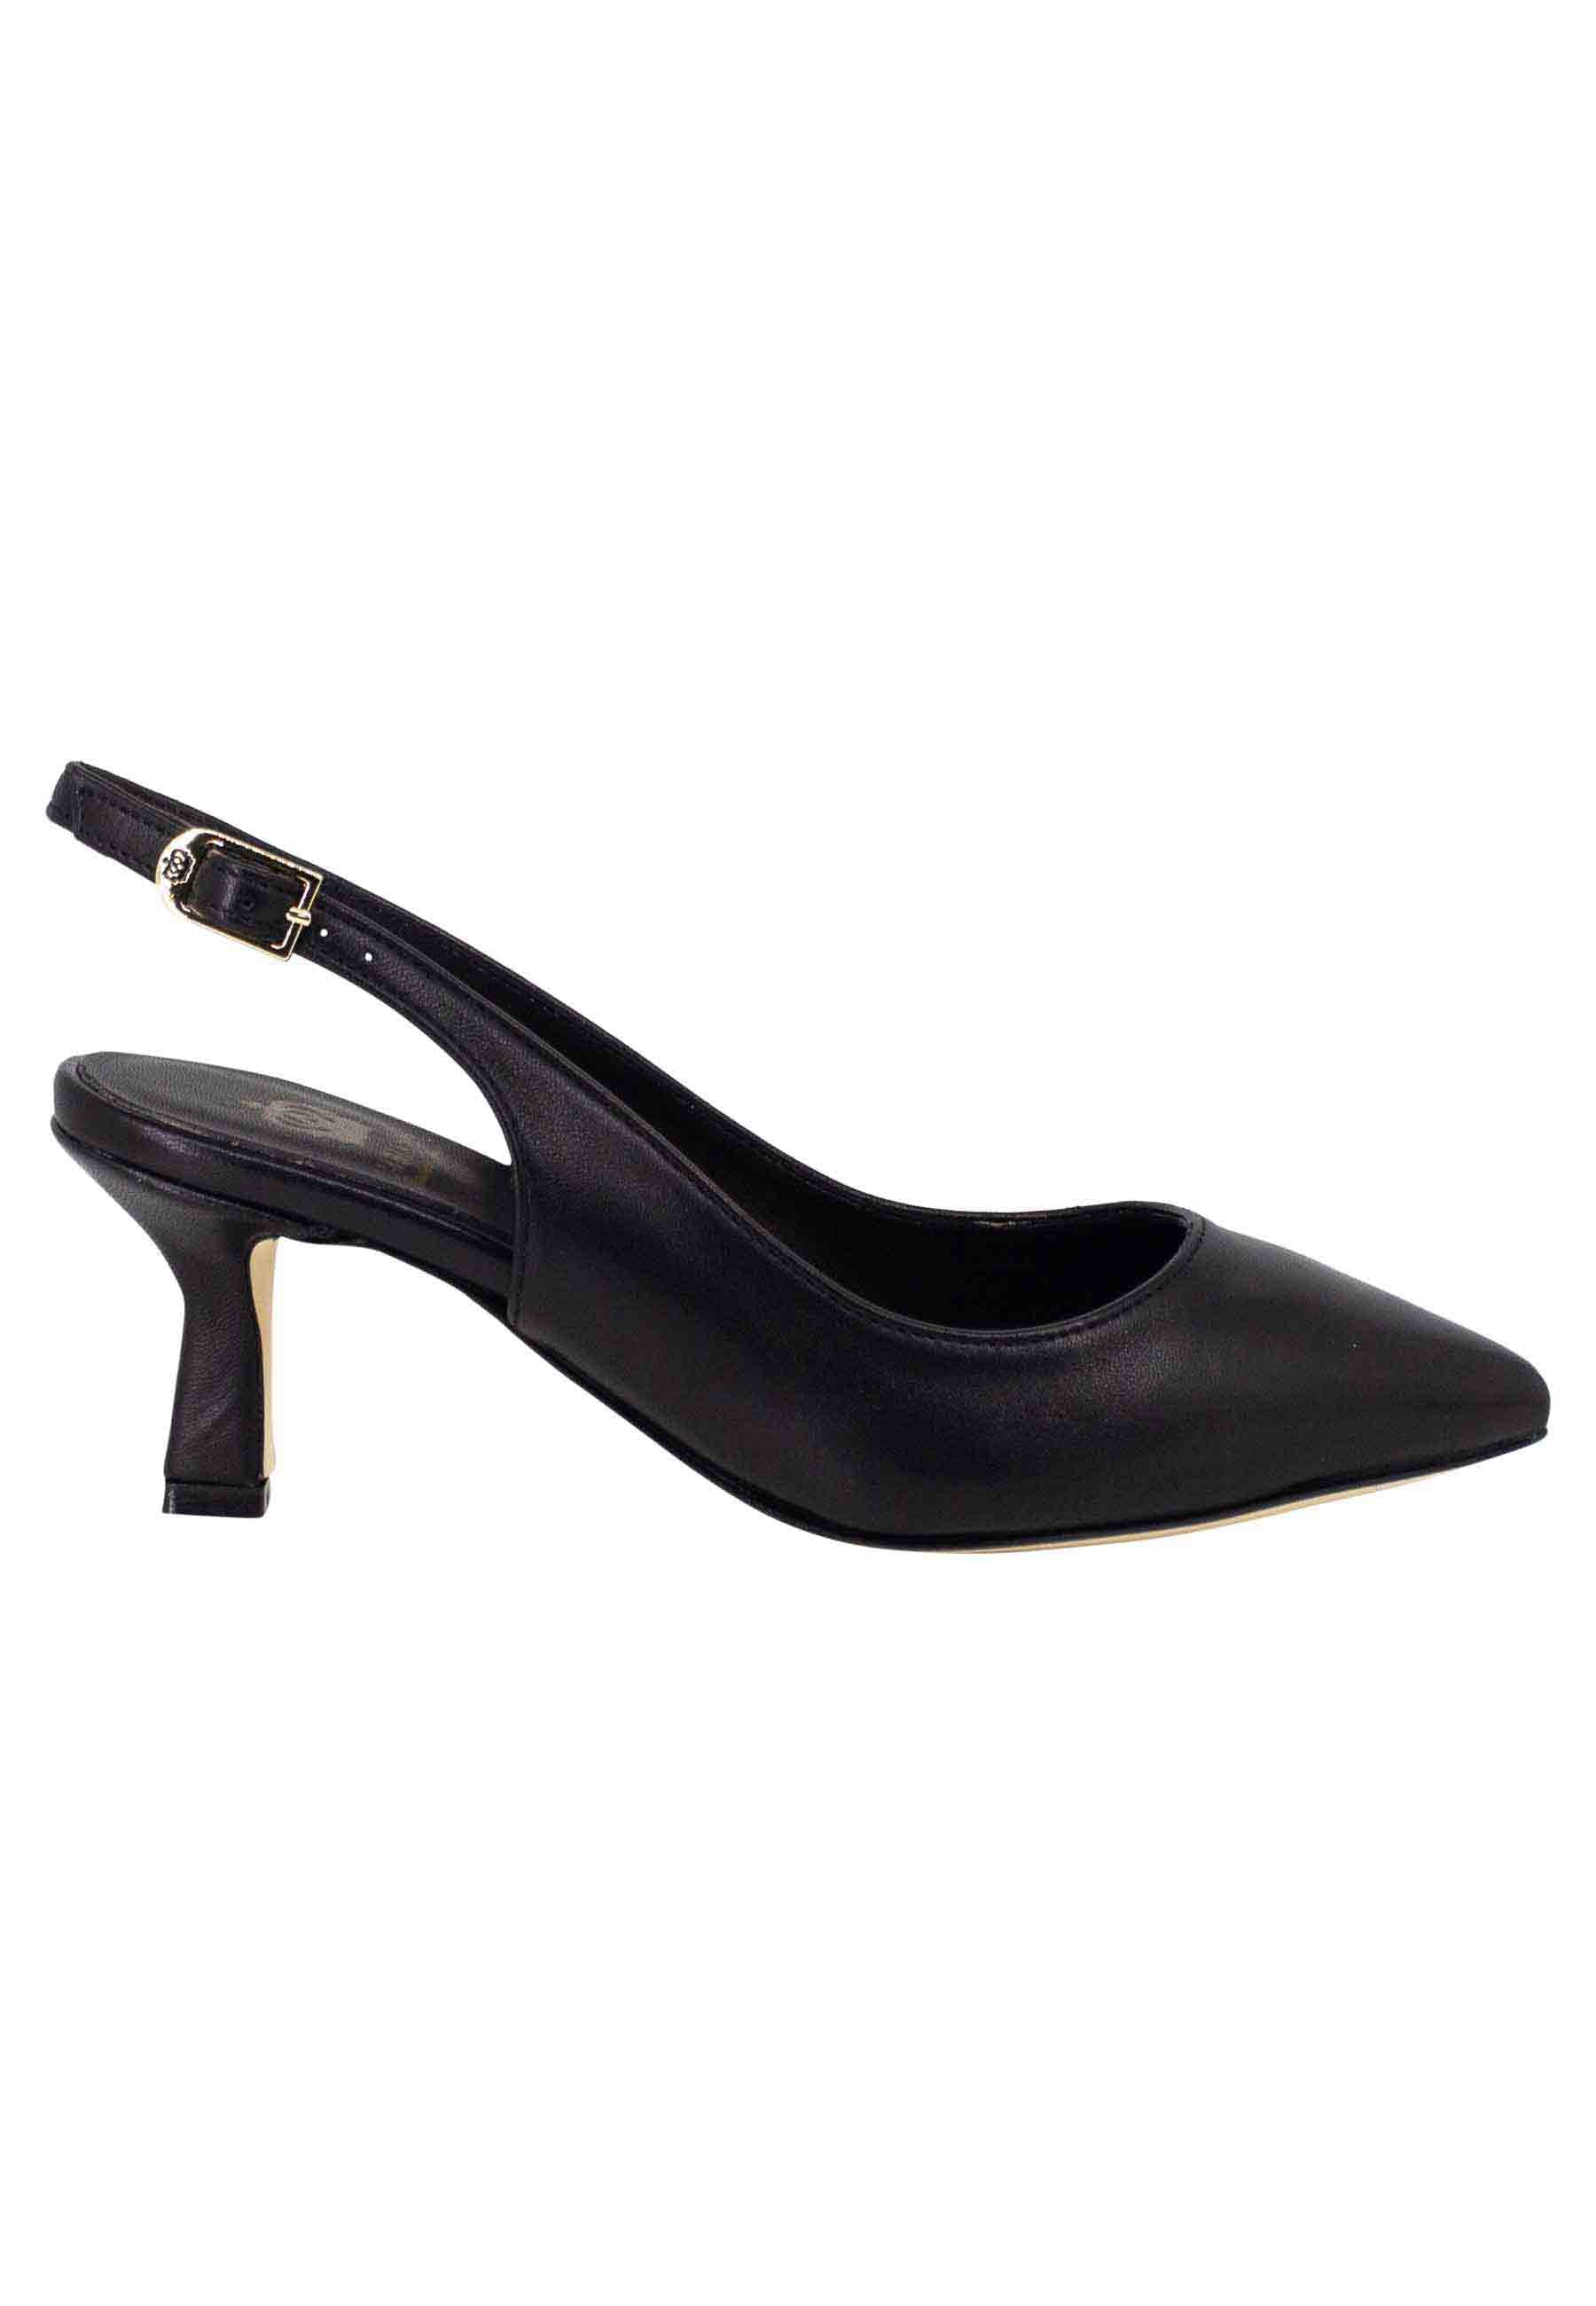 Women's slingback pumps in black leather with leather sole